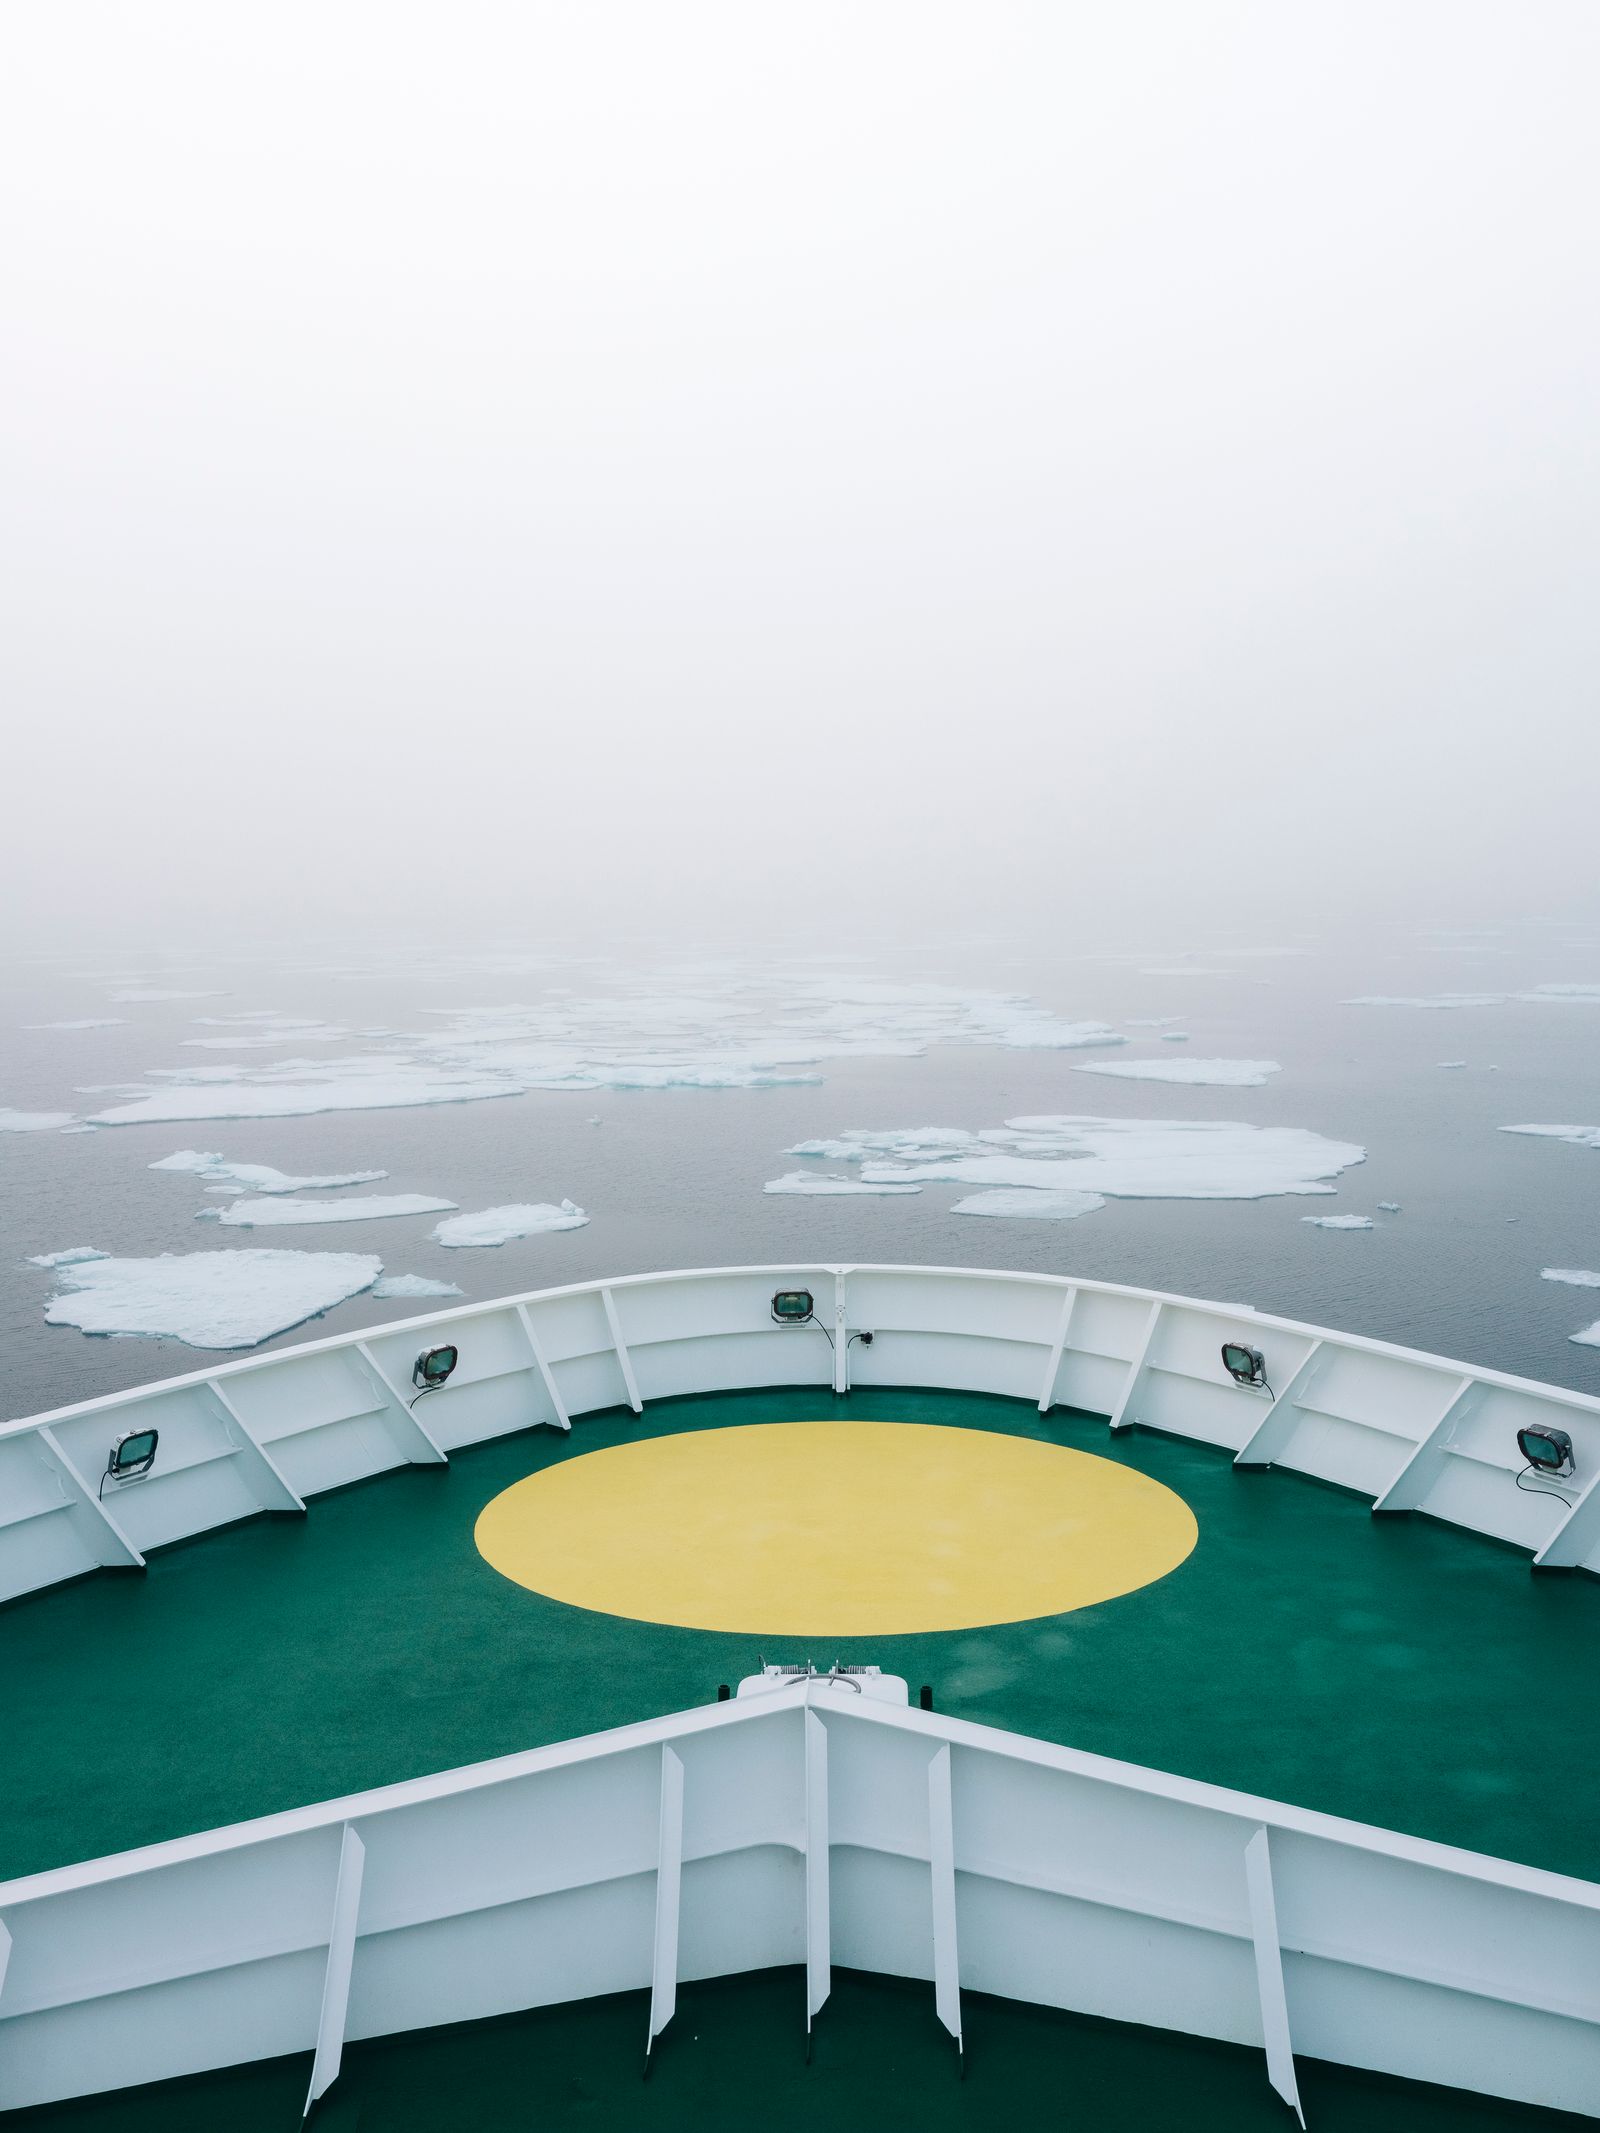 © Jan Richard Heinicke - Fog is a very common phenomenon in the arctic when warm surface water meets cool air on the ocean surface.